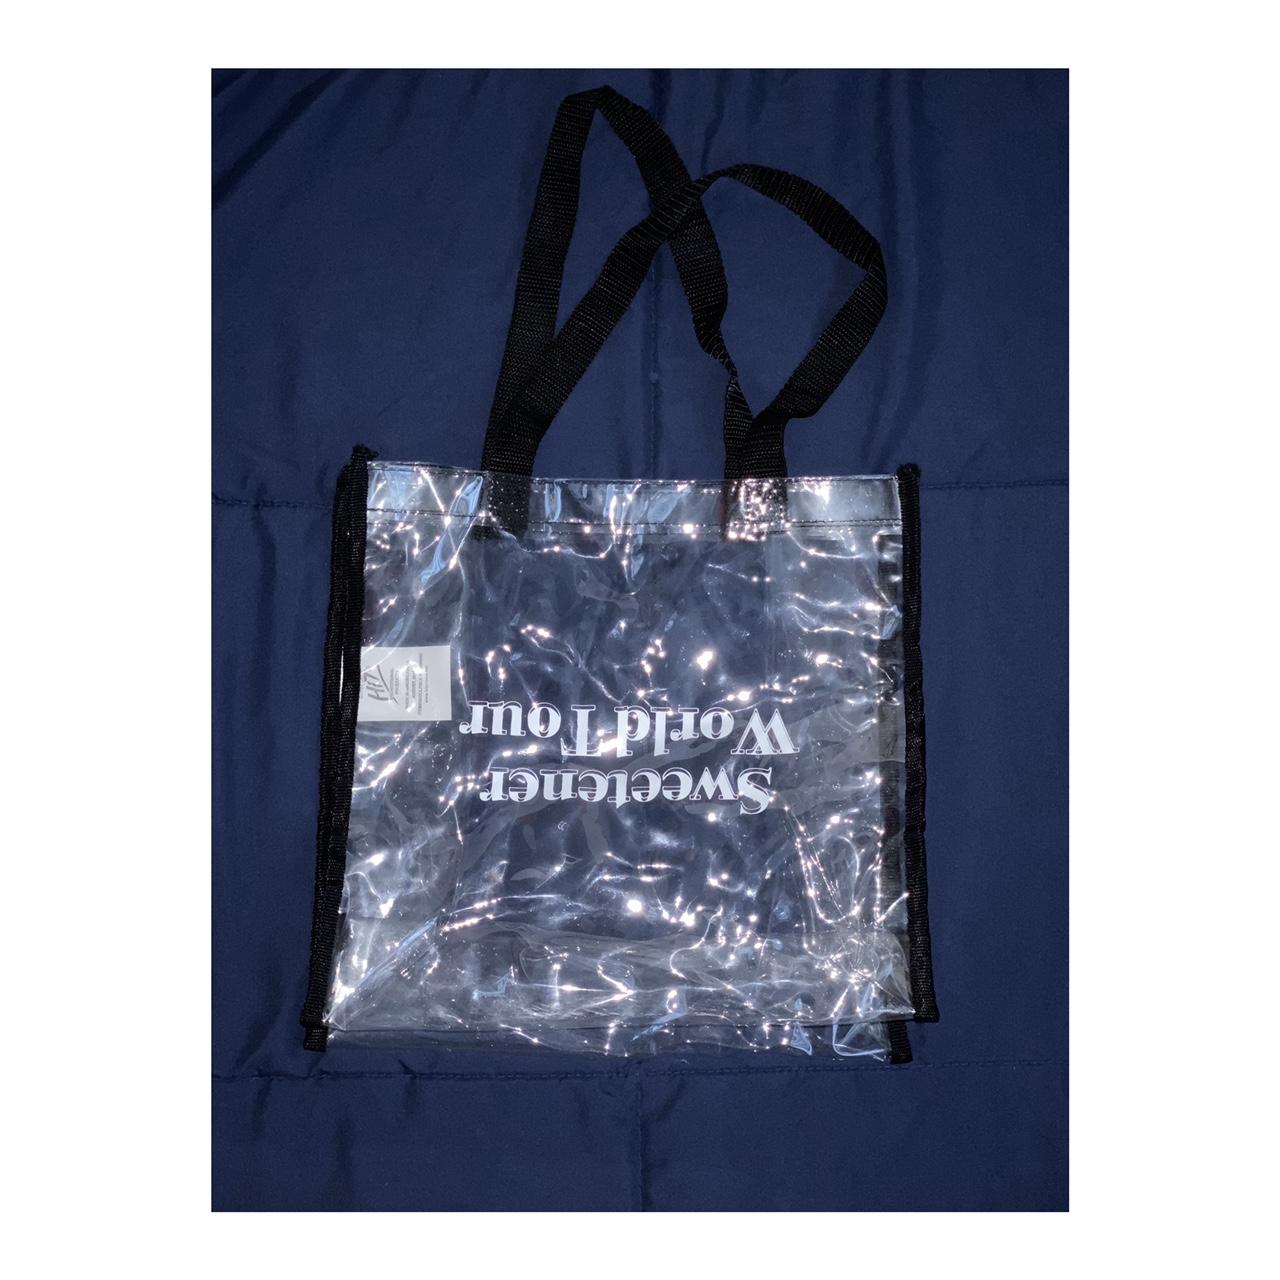 Ariana Grande - Thank You, Next Eco Tote Bag – Hype Current